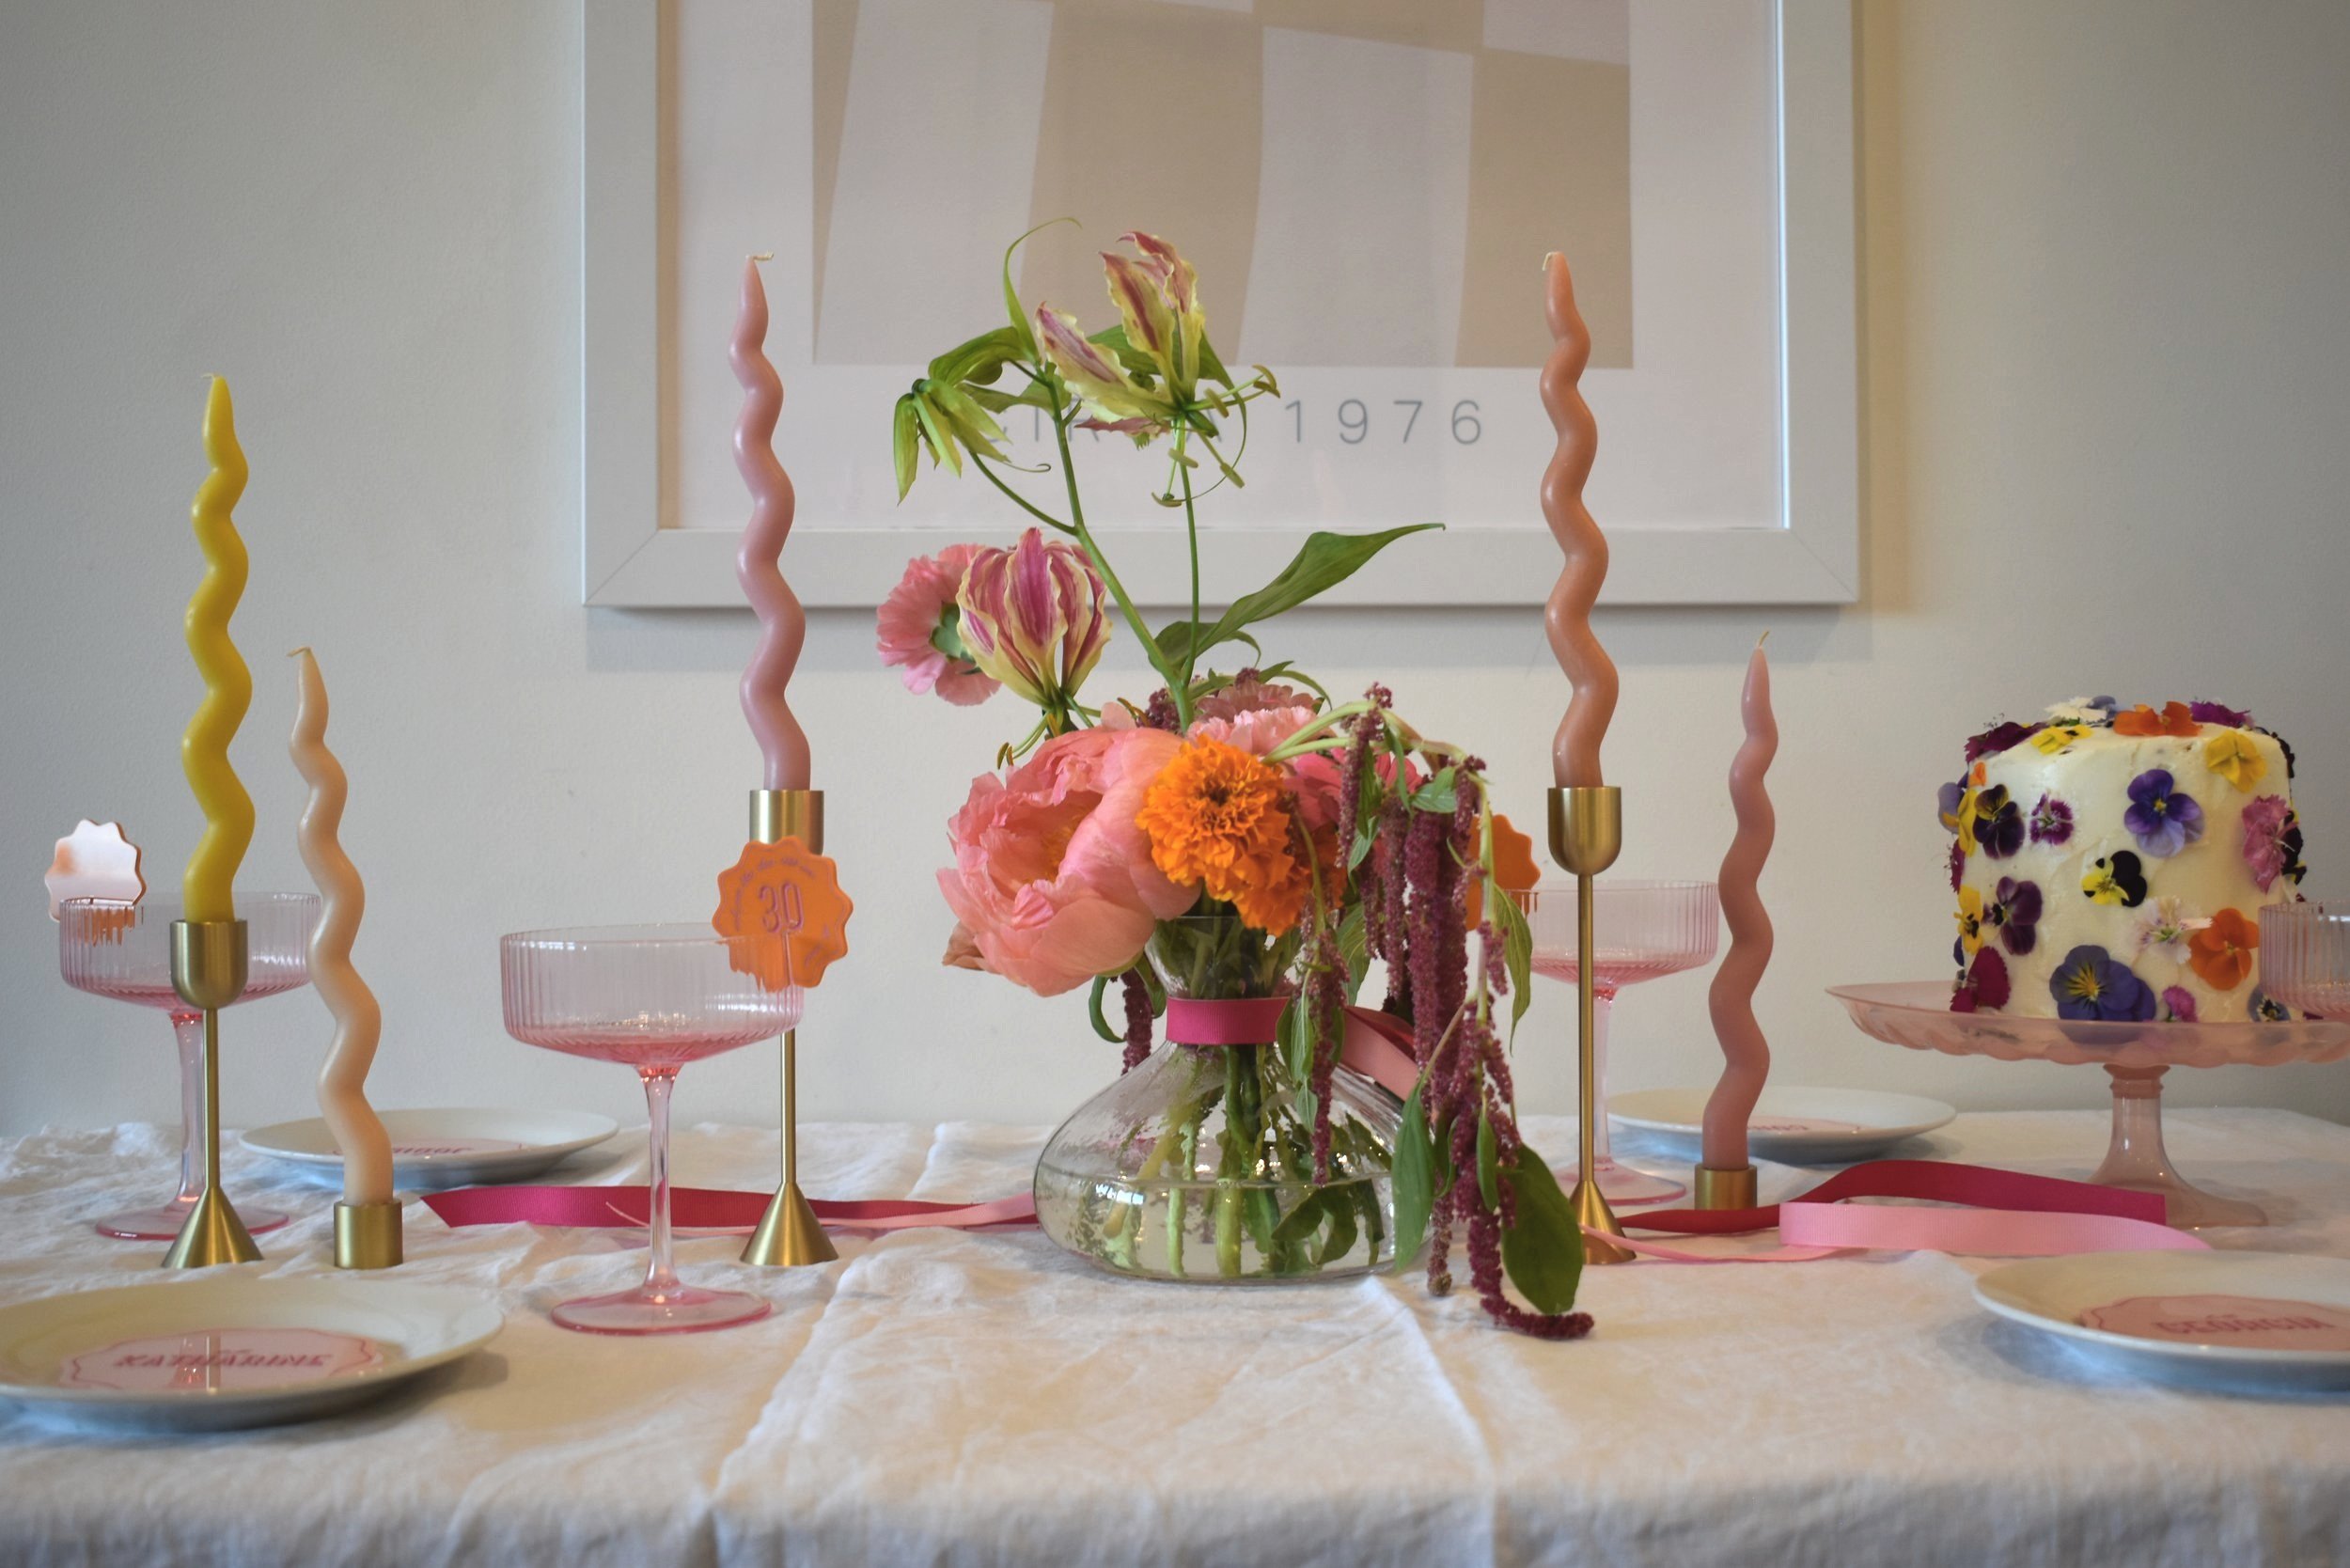 Vibrant table setting, with bright tropical florals in the center, wavey candles with pinks and yellows, sitting next to pink see-through deep martini glasses with orange drinks tags. A cake with florals sits to the right of the table and art sit behind the table on a cream wall. 